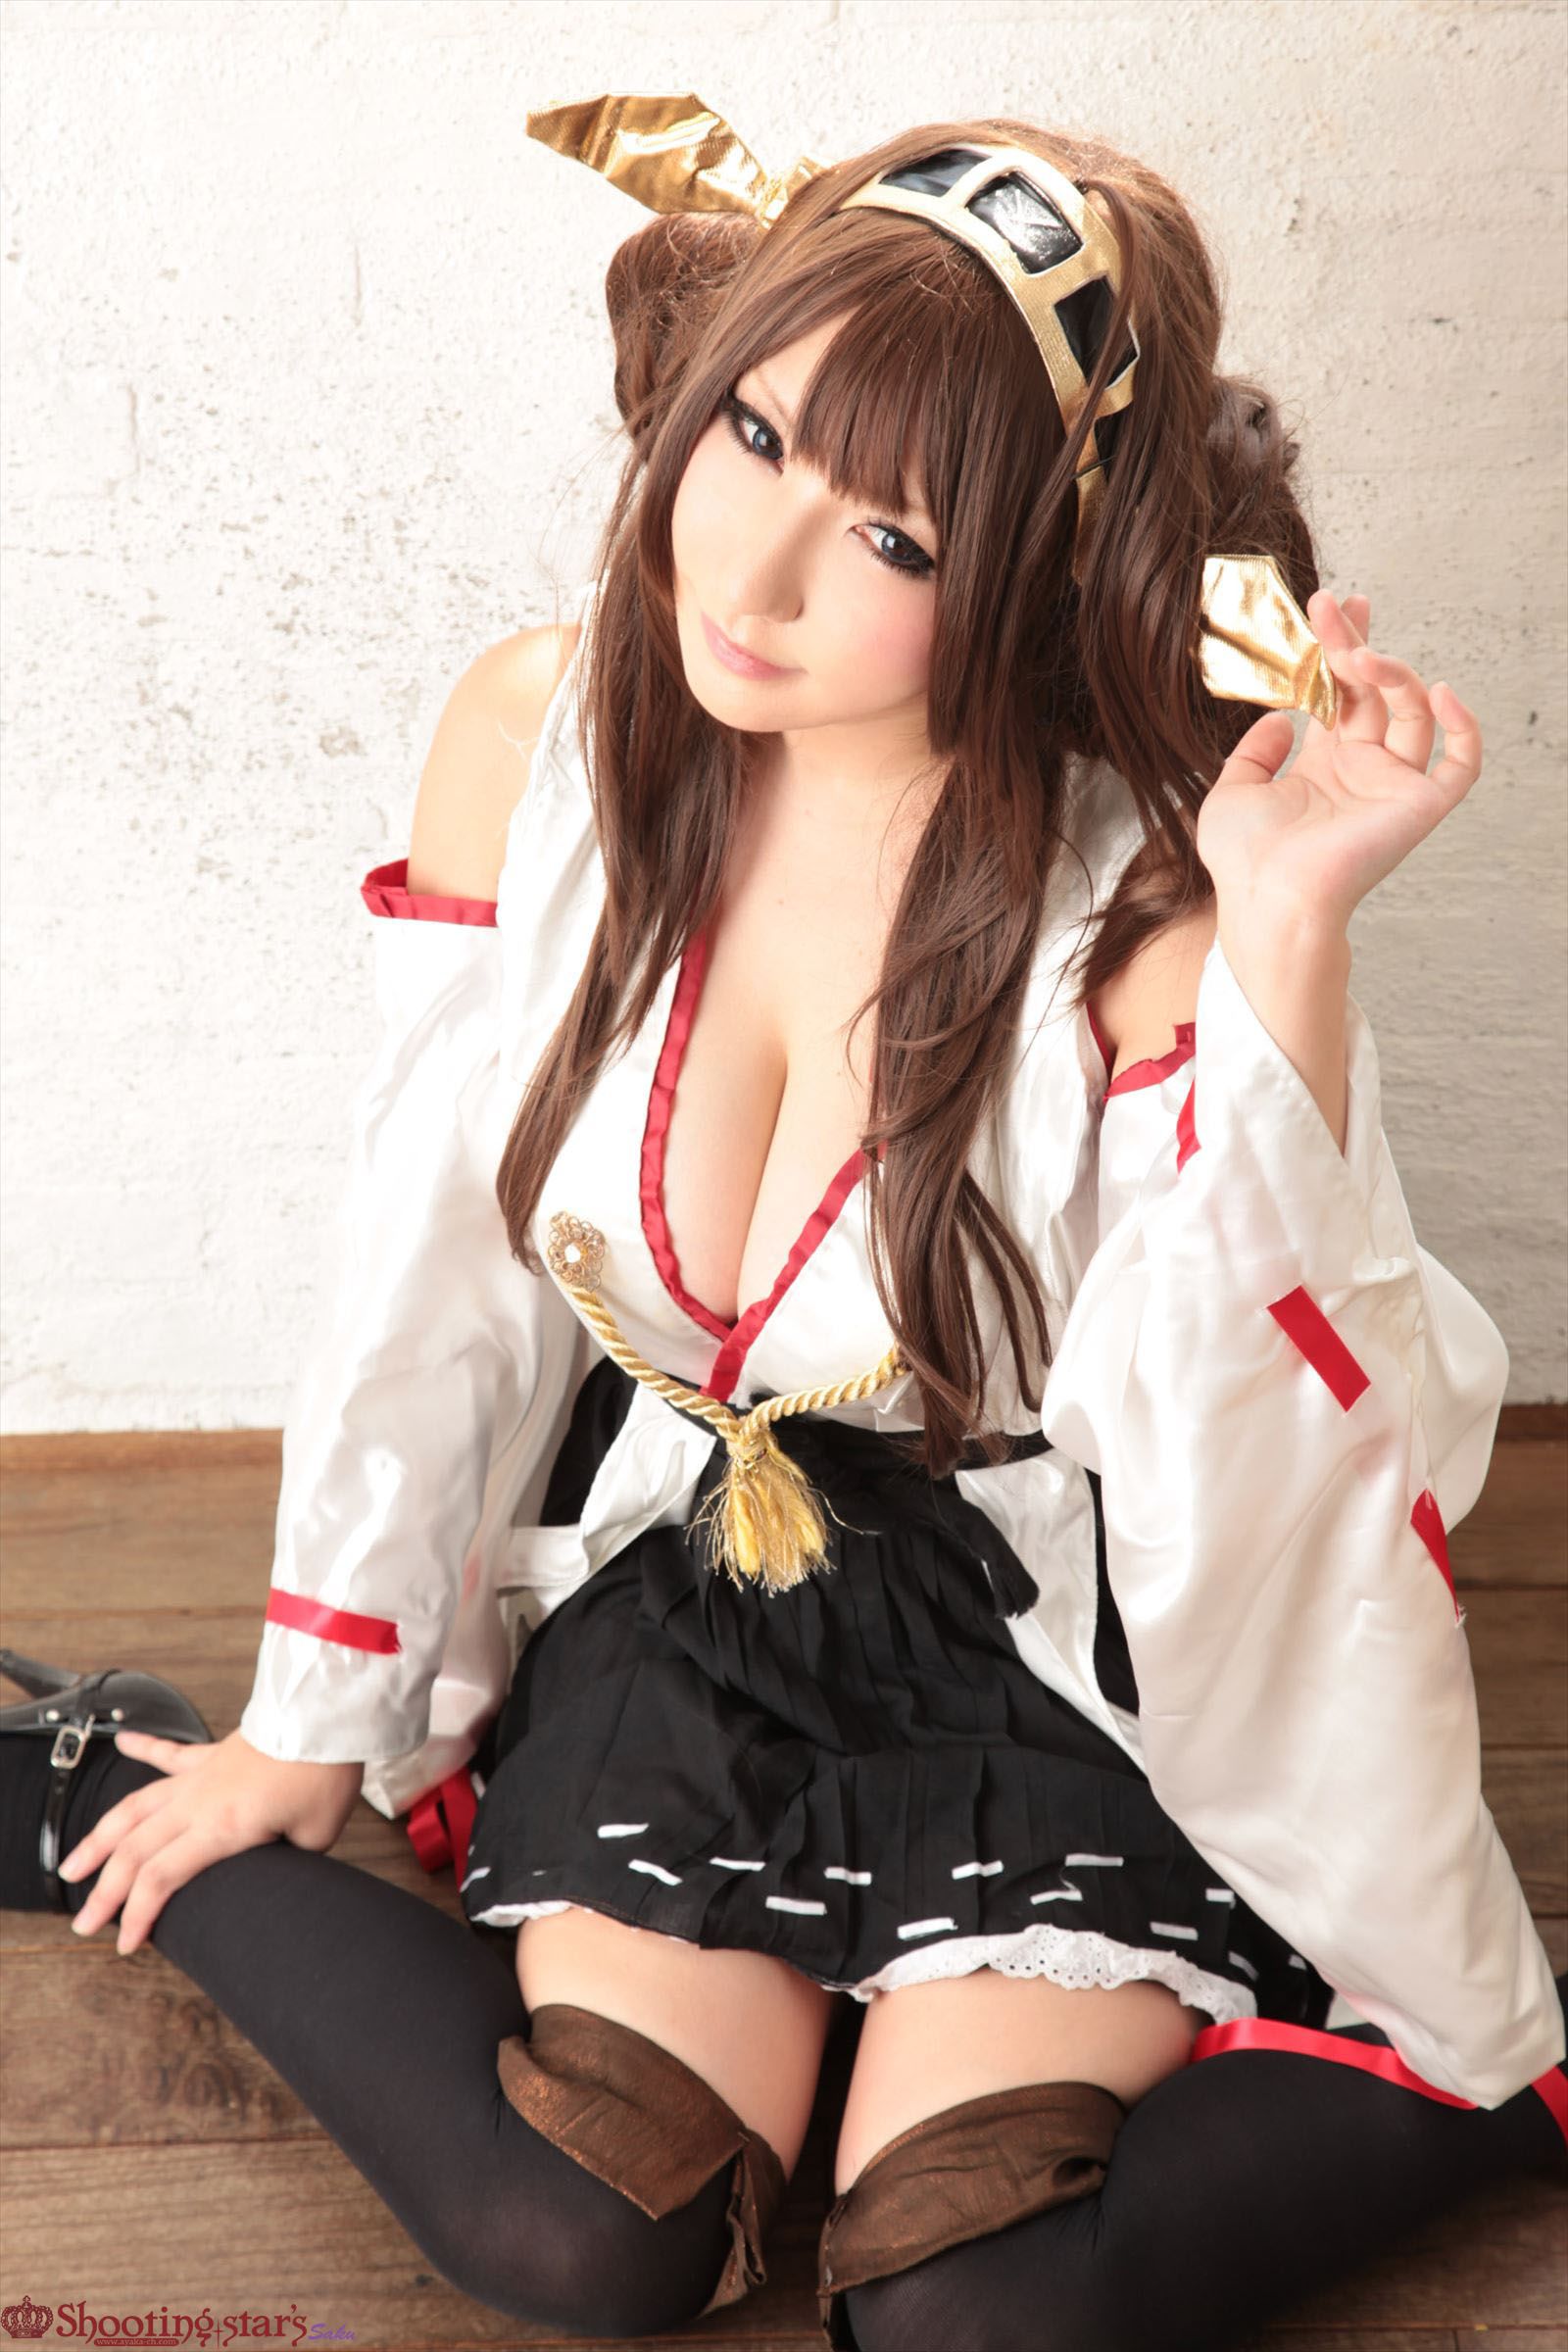 [Cospley] Sexy Kongou from Kantai Collection under the water 之室拍系列[126P]